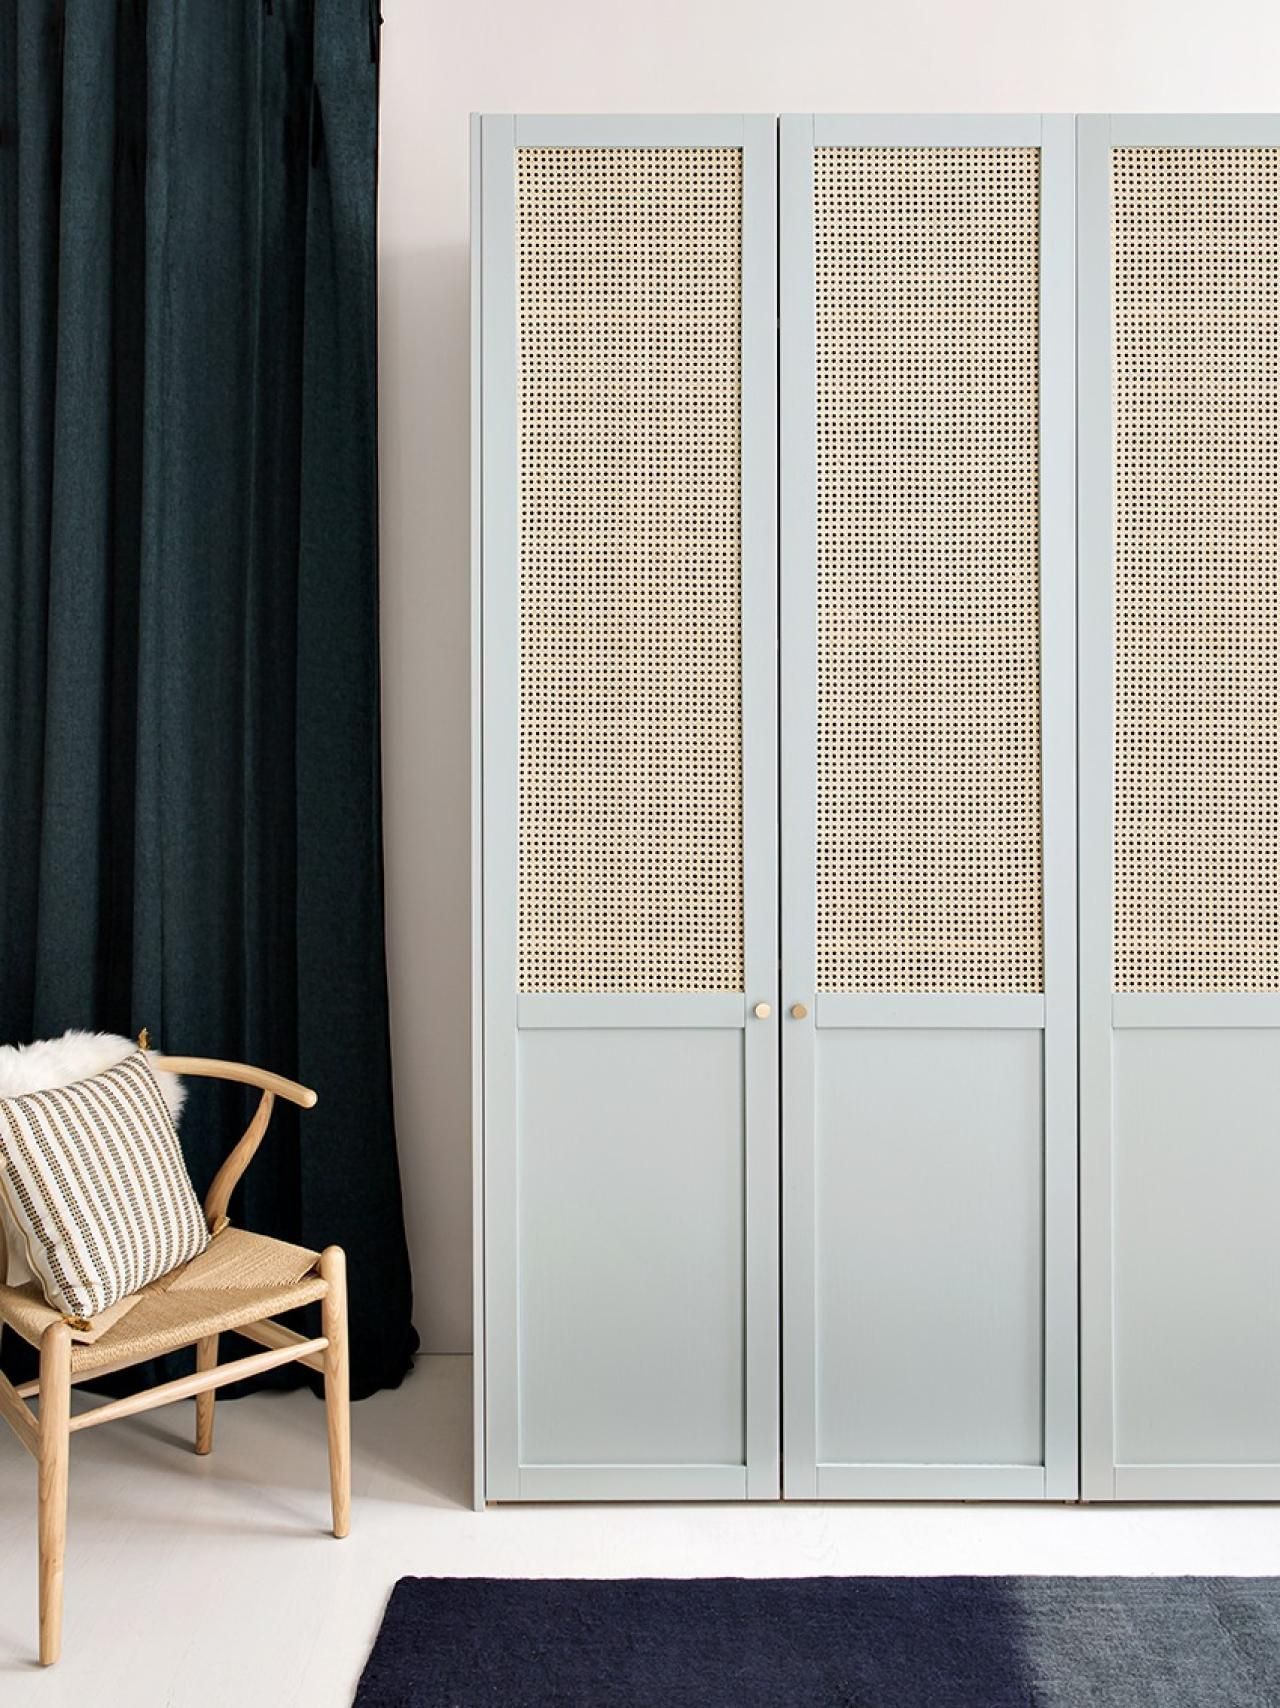 A Wardrobe In Cane And Painted Oak | Plum Intended For White Rattan Wardrobes (View 8 of 15)